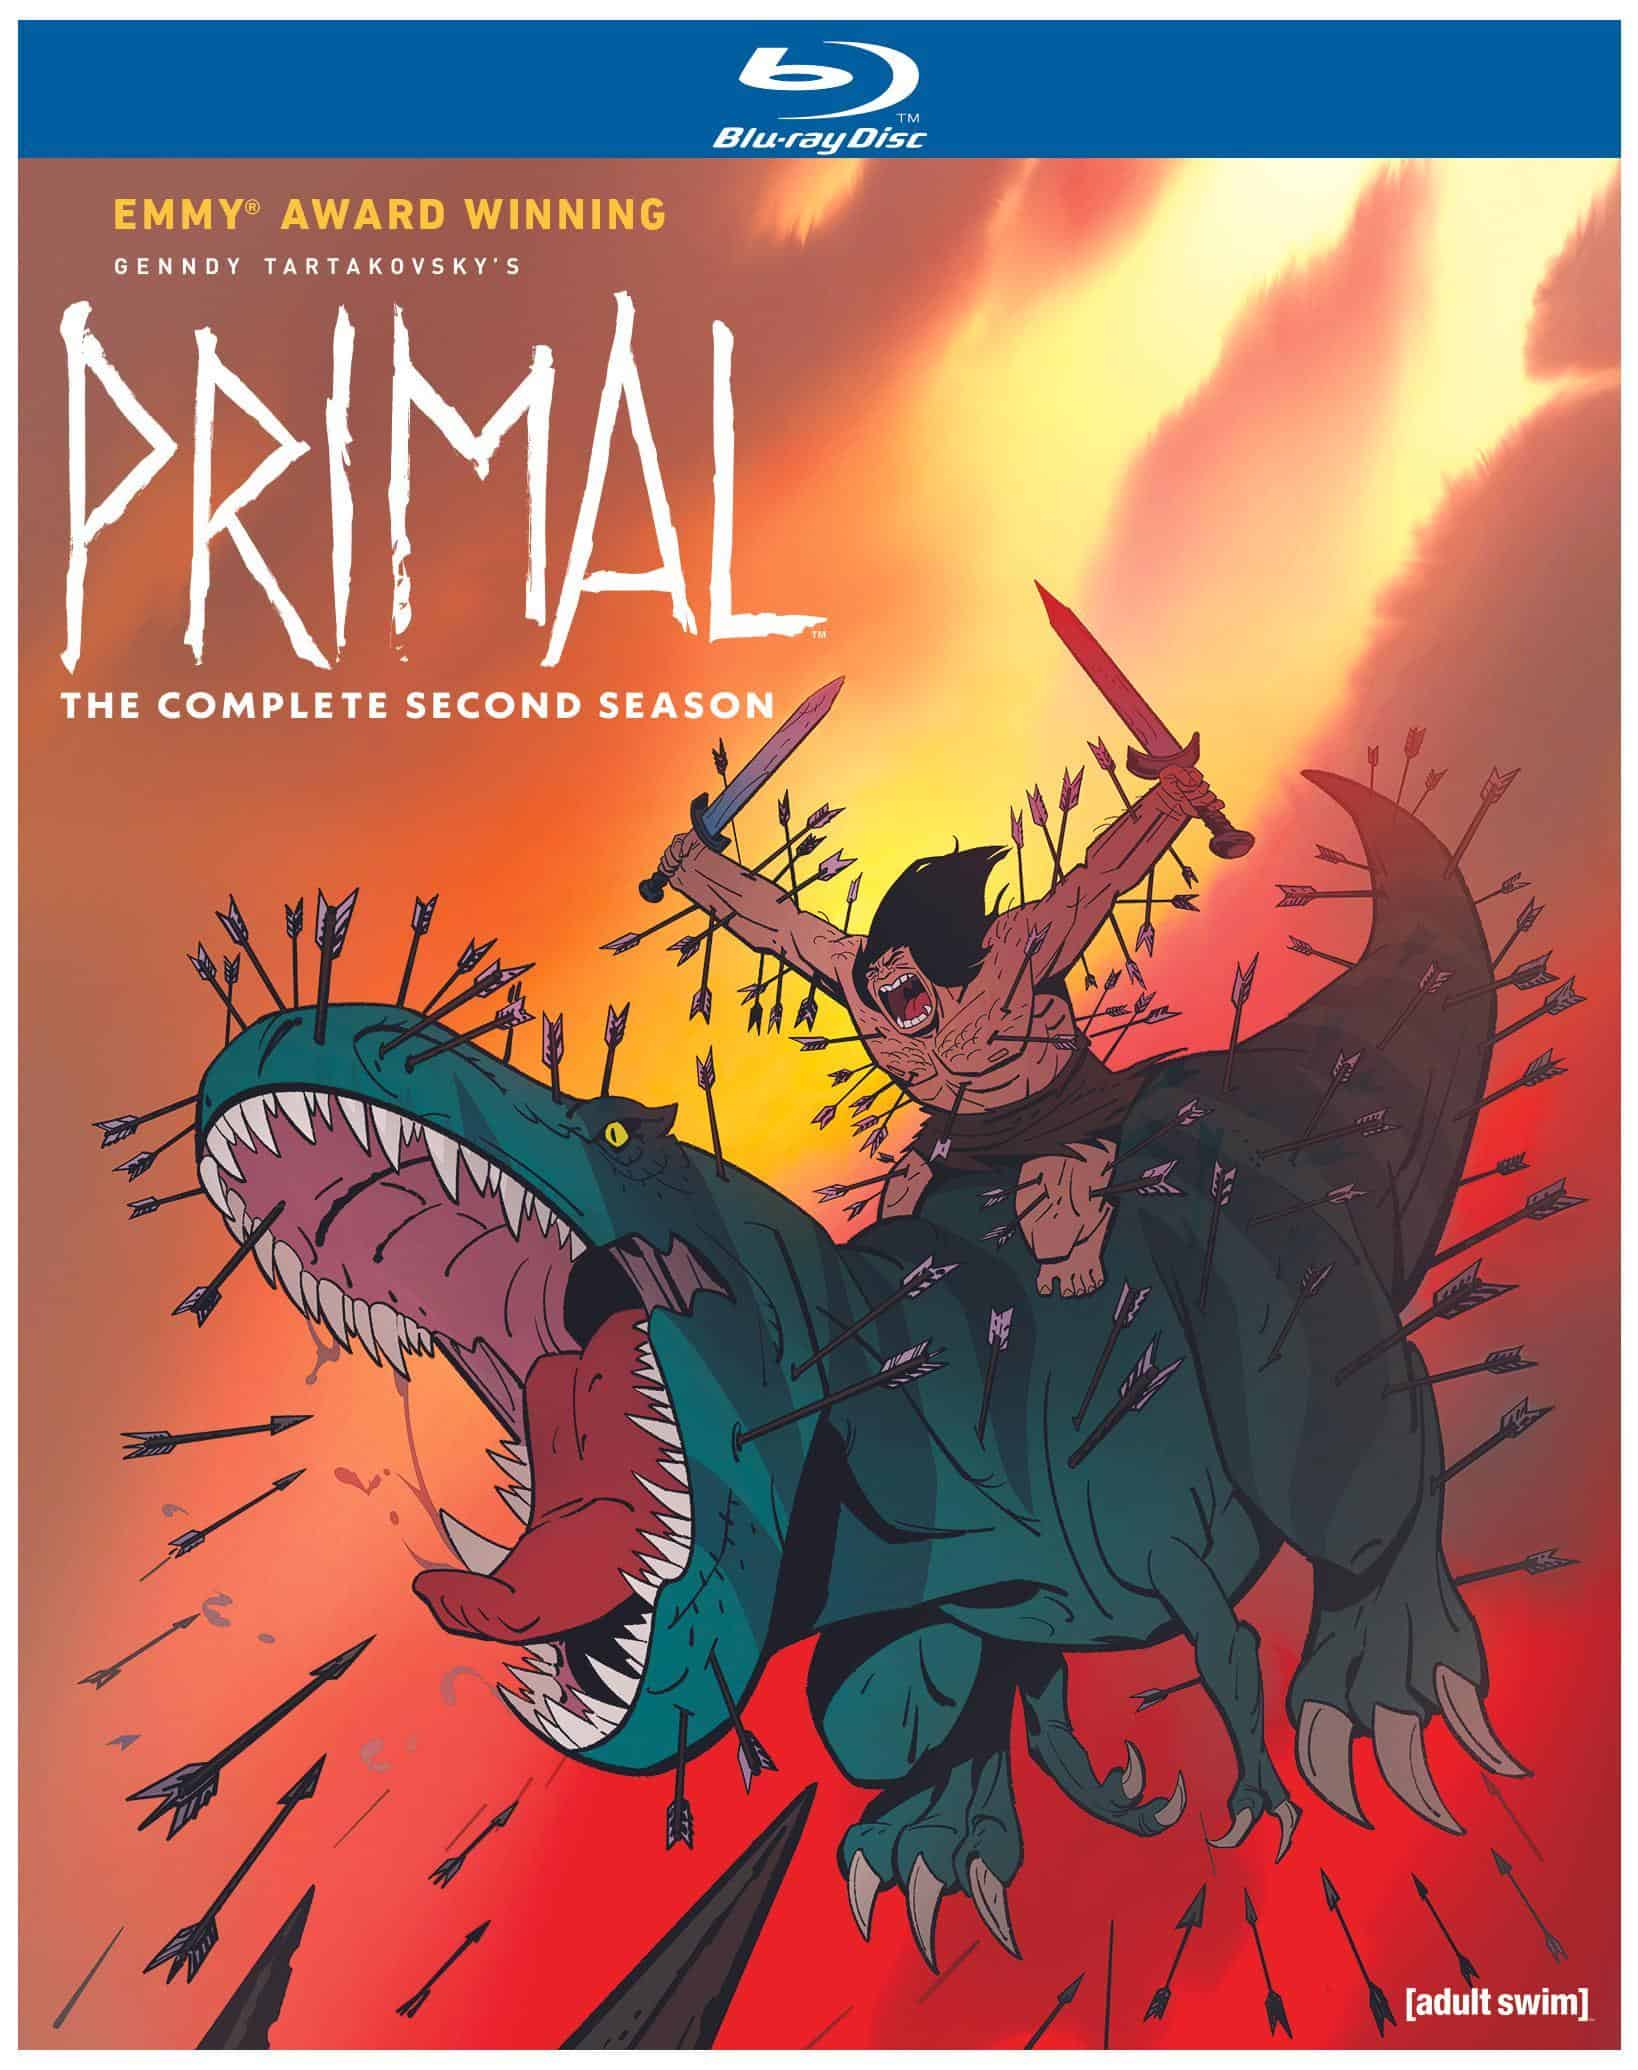 Primal: The Complete Second Season comes to Blu-ray April 25th 24